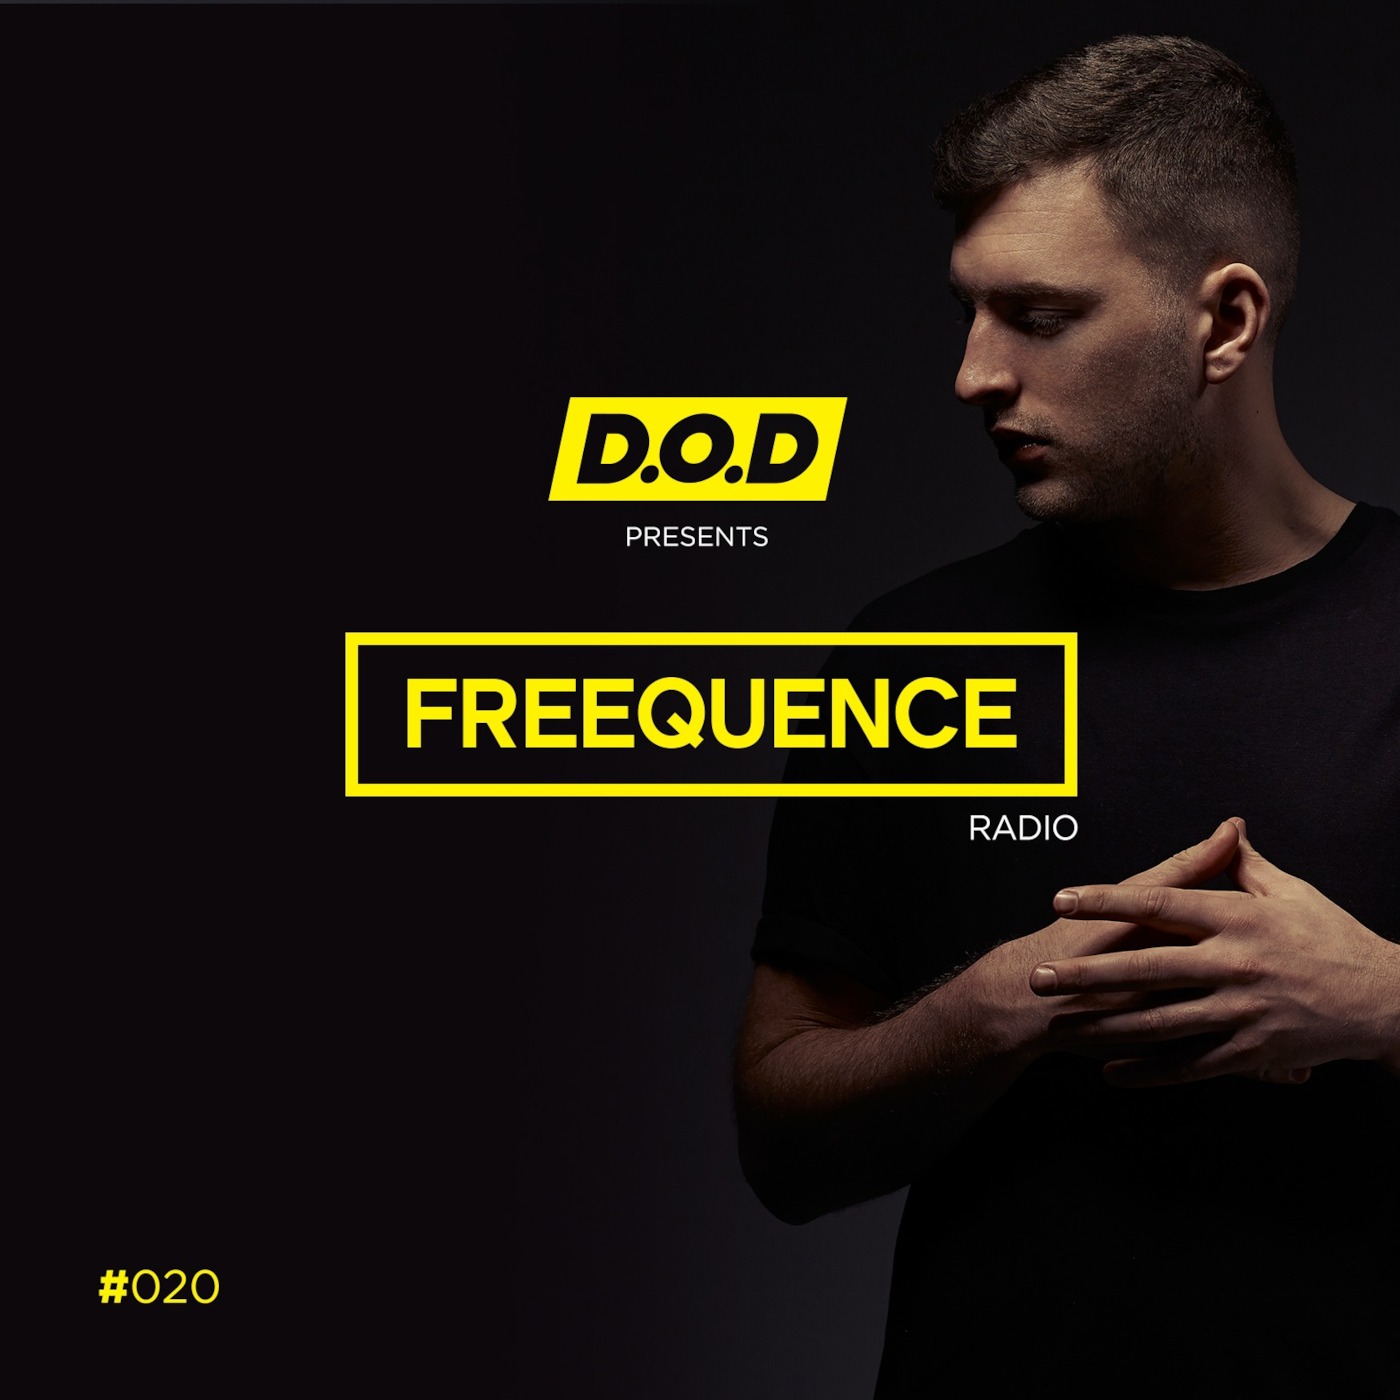 #FREEQUENCE Radio with D.O.D #020